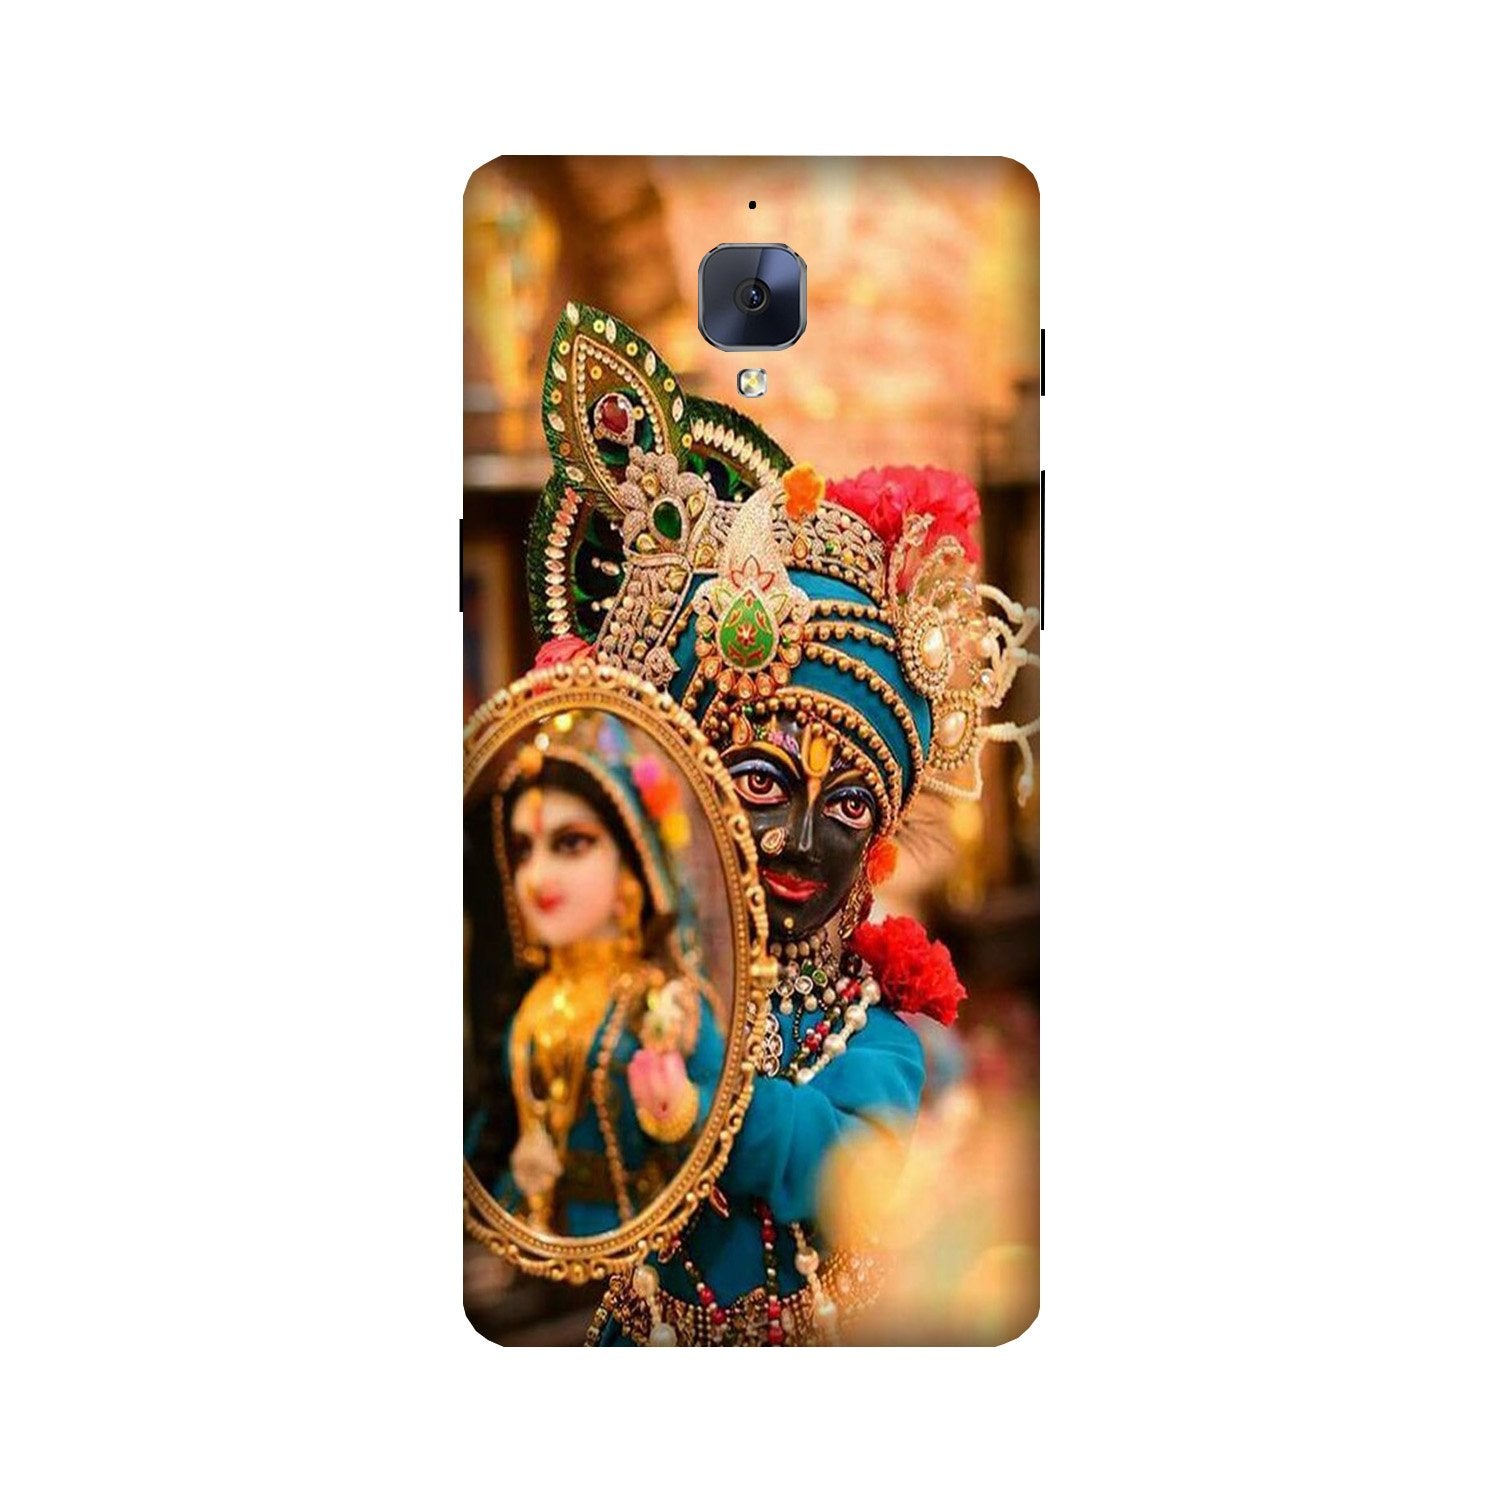 Lord Krishna5 Case for OnePlus 3/ 3T